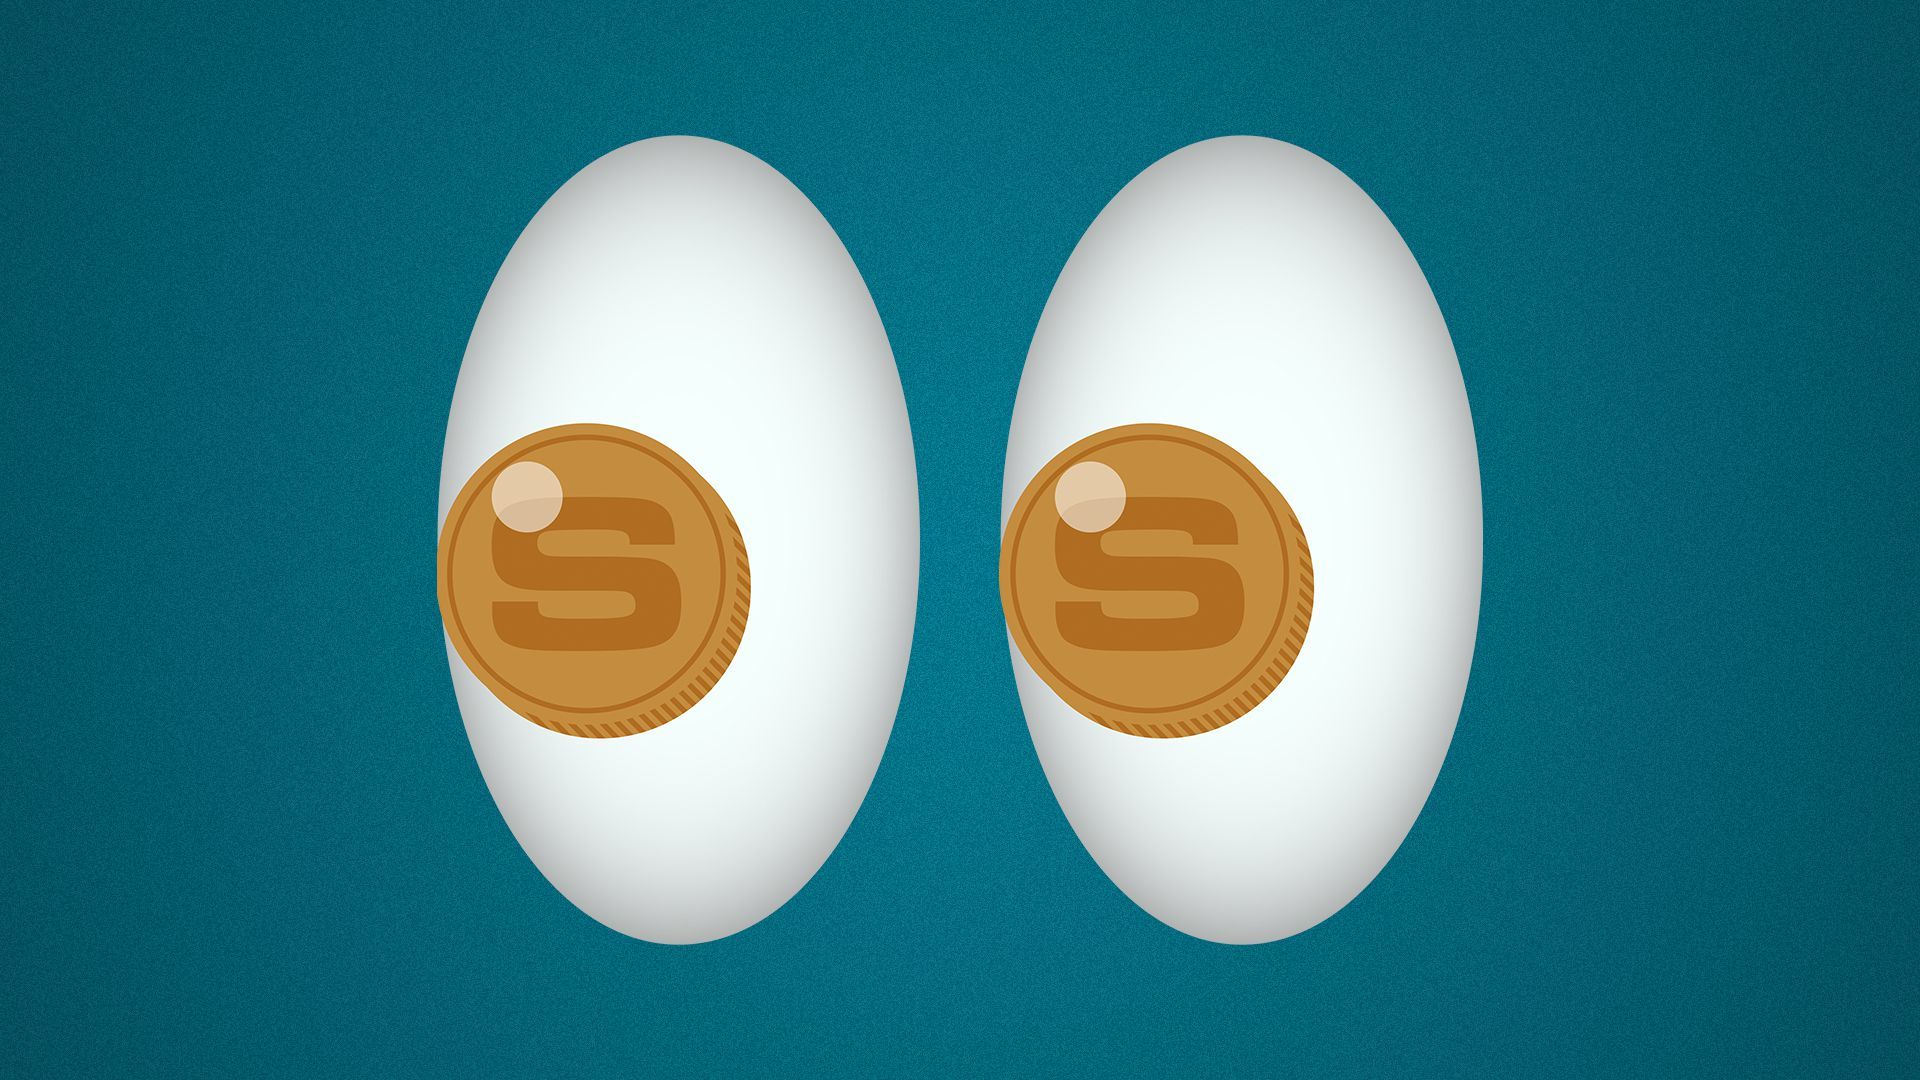 Illustration of emoji eyes with two coins with the letter s in it for students.